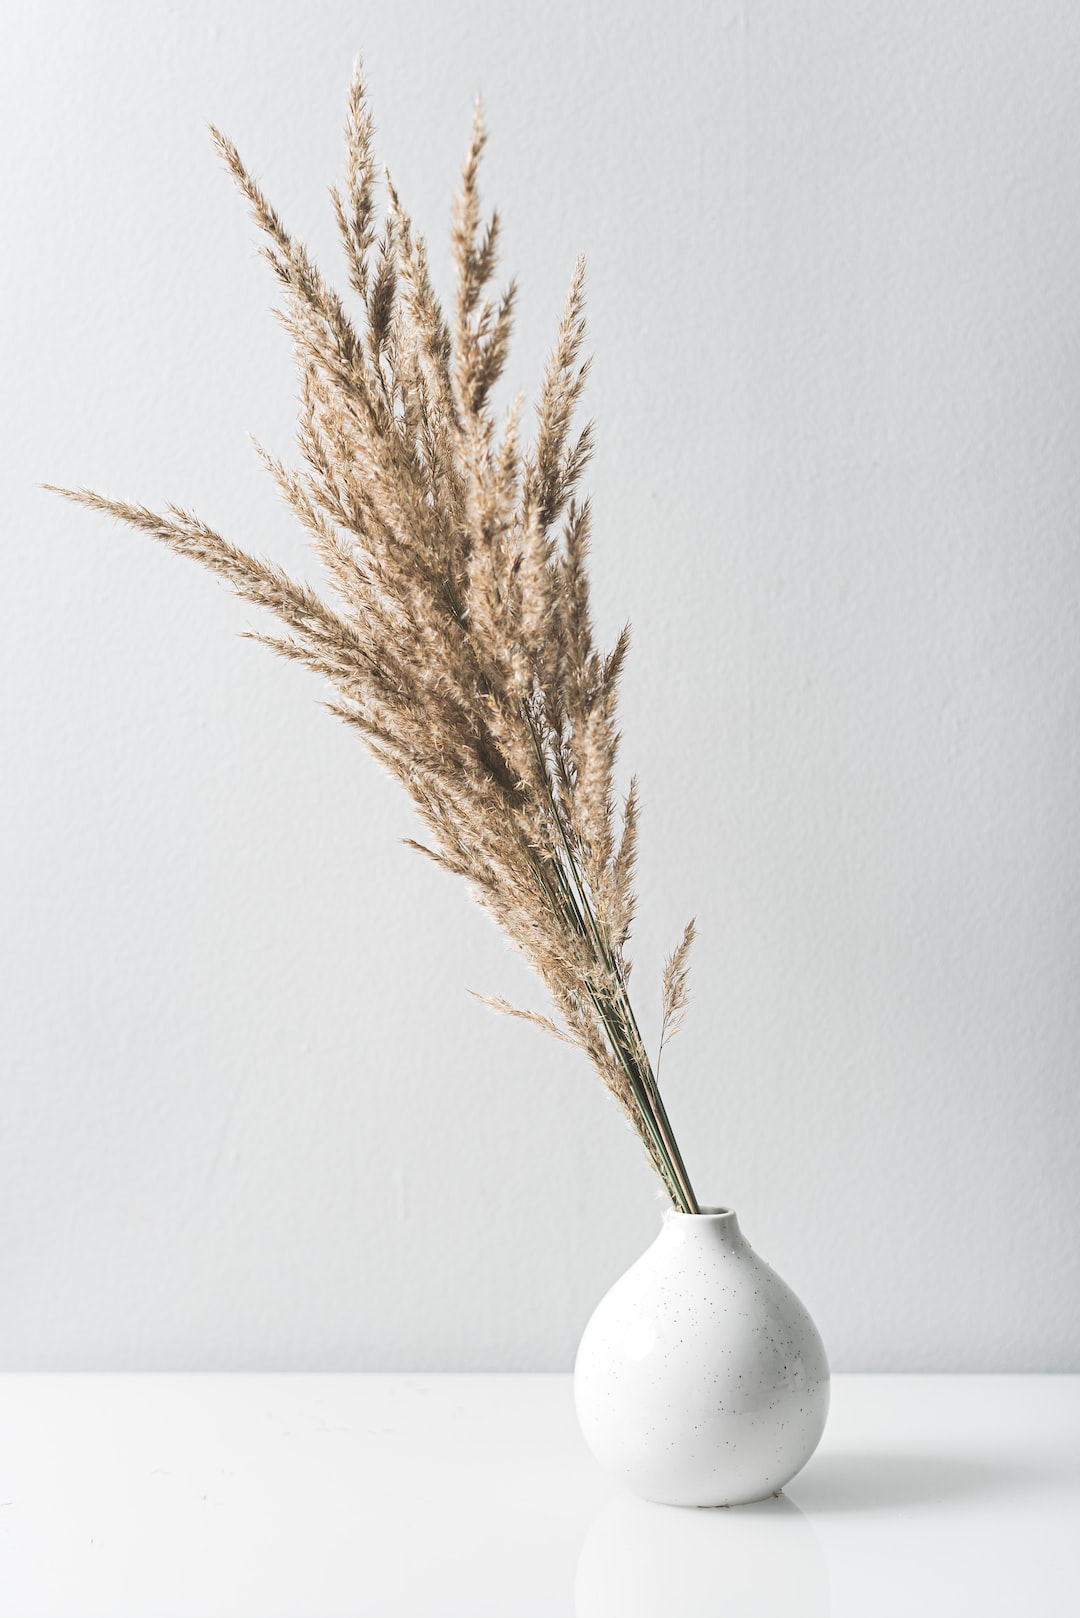 Dried grass in a white vase